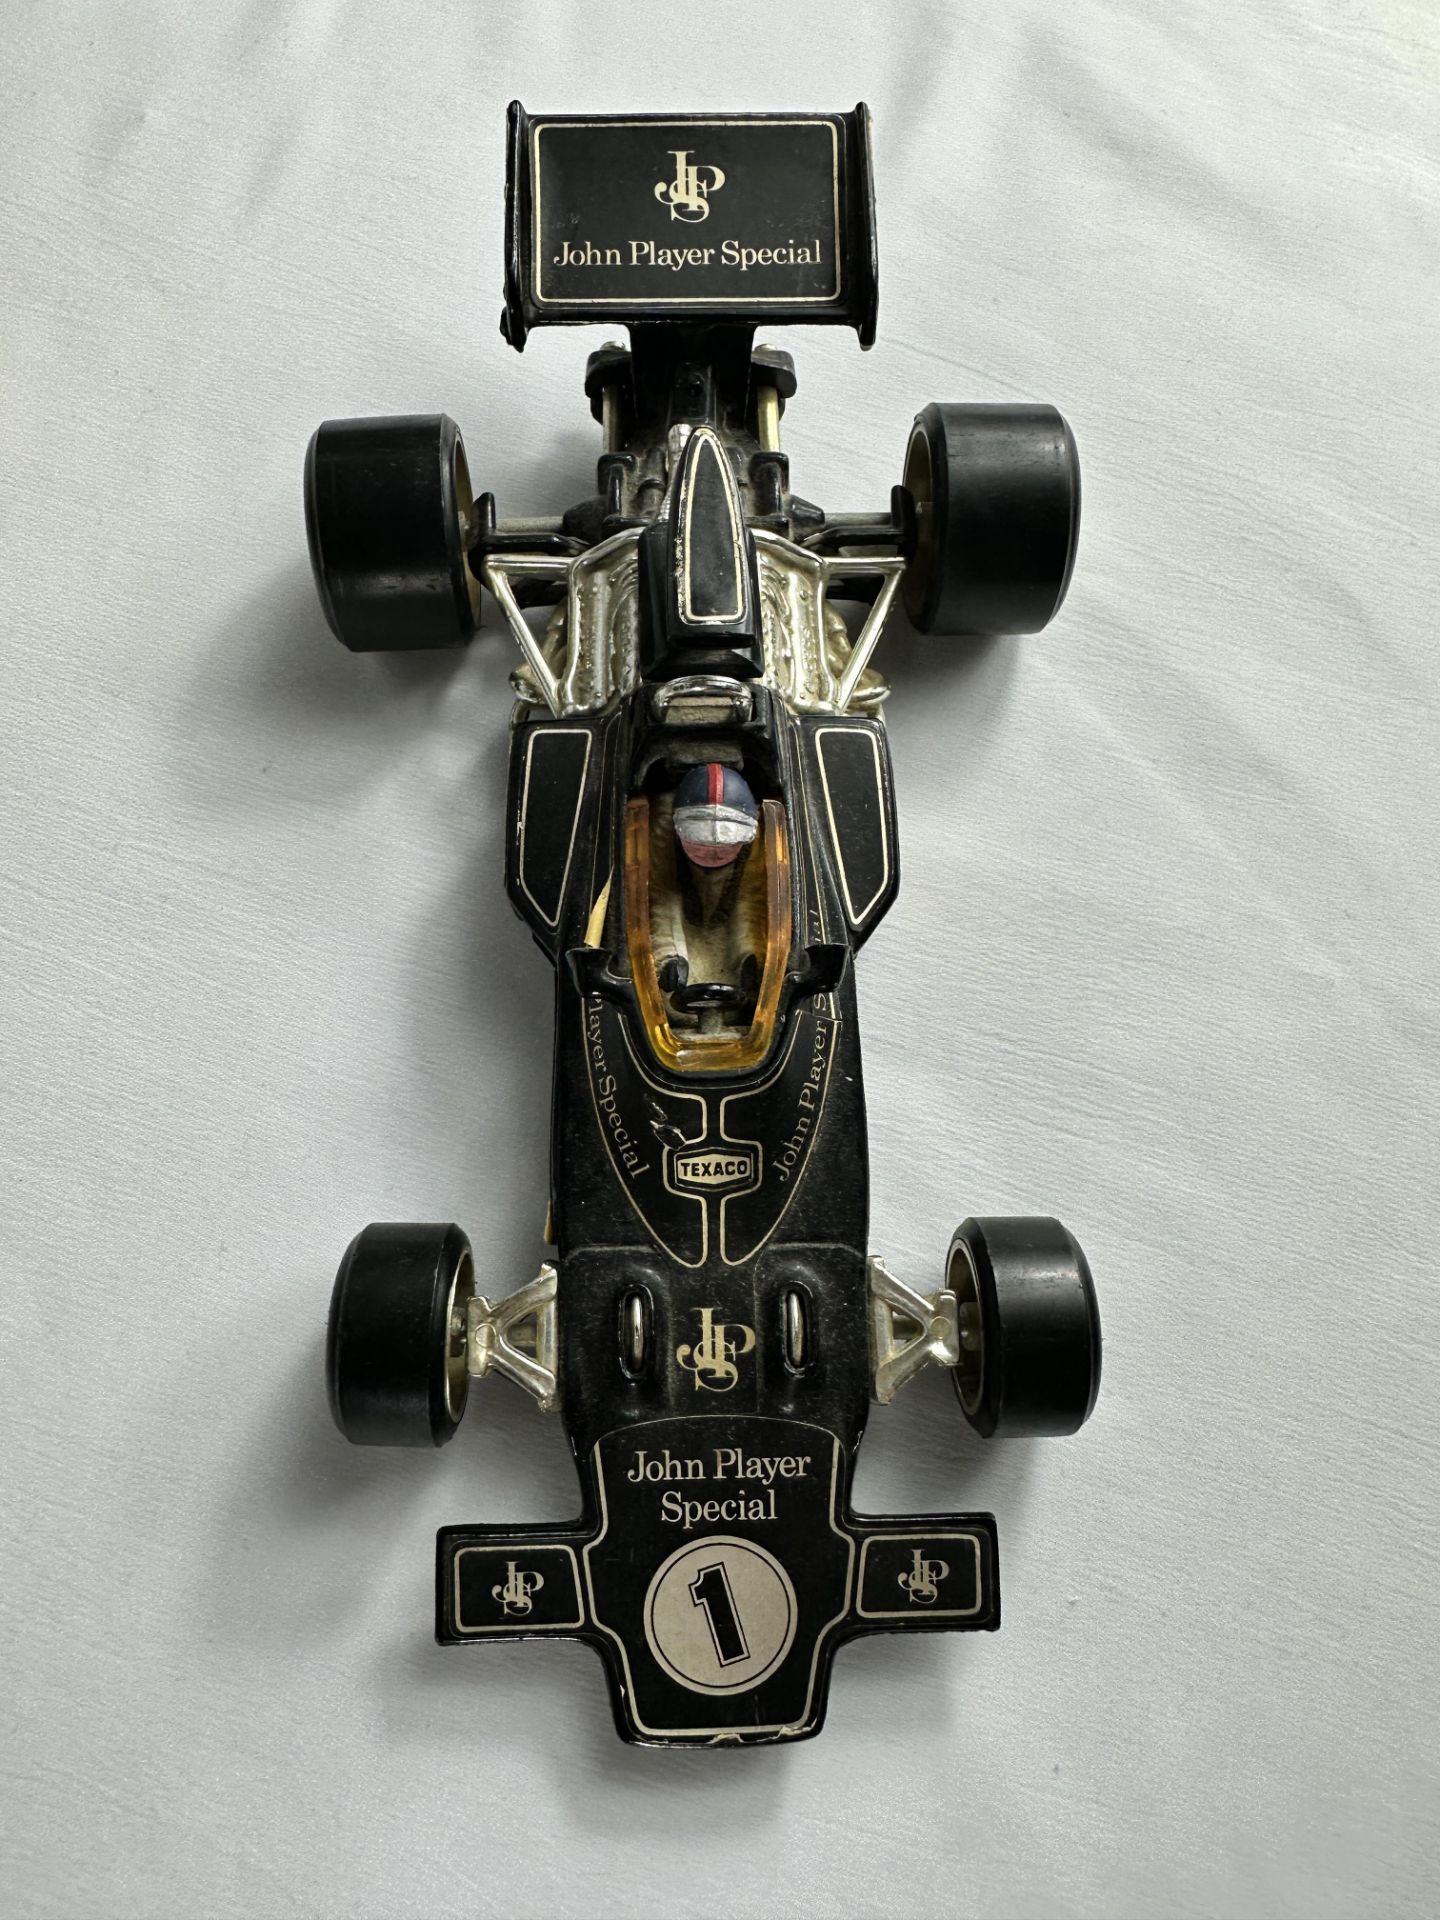 Corgi F1 model car, together with other model vehicles - Image 9 of 9